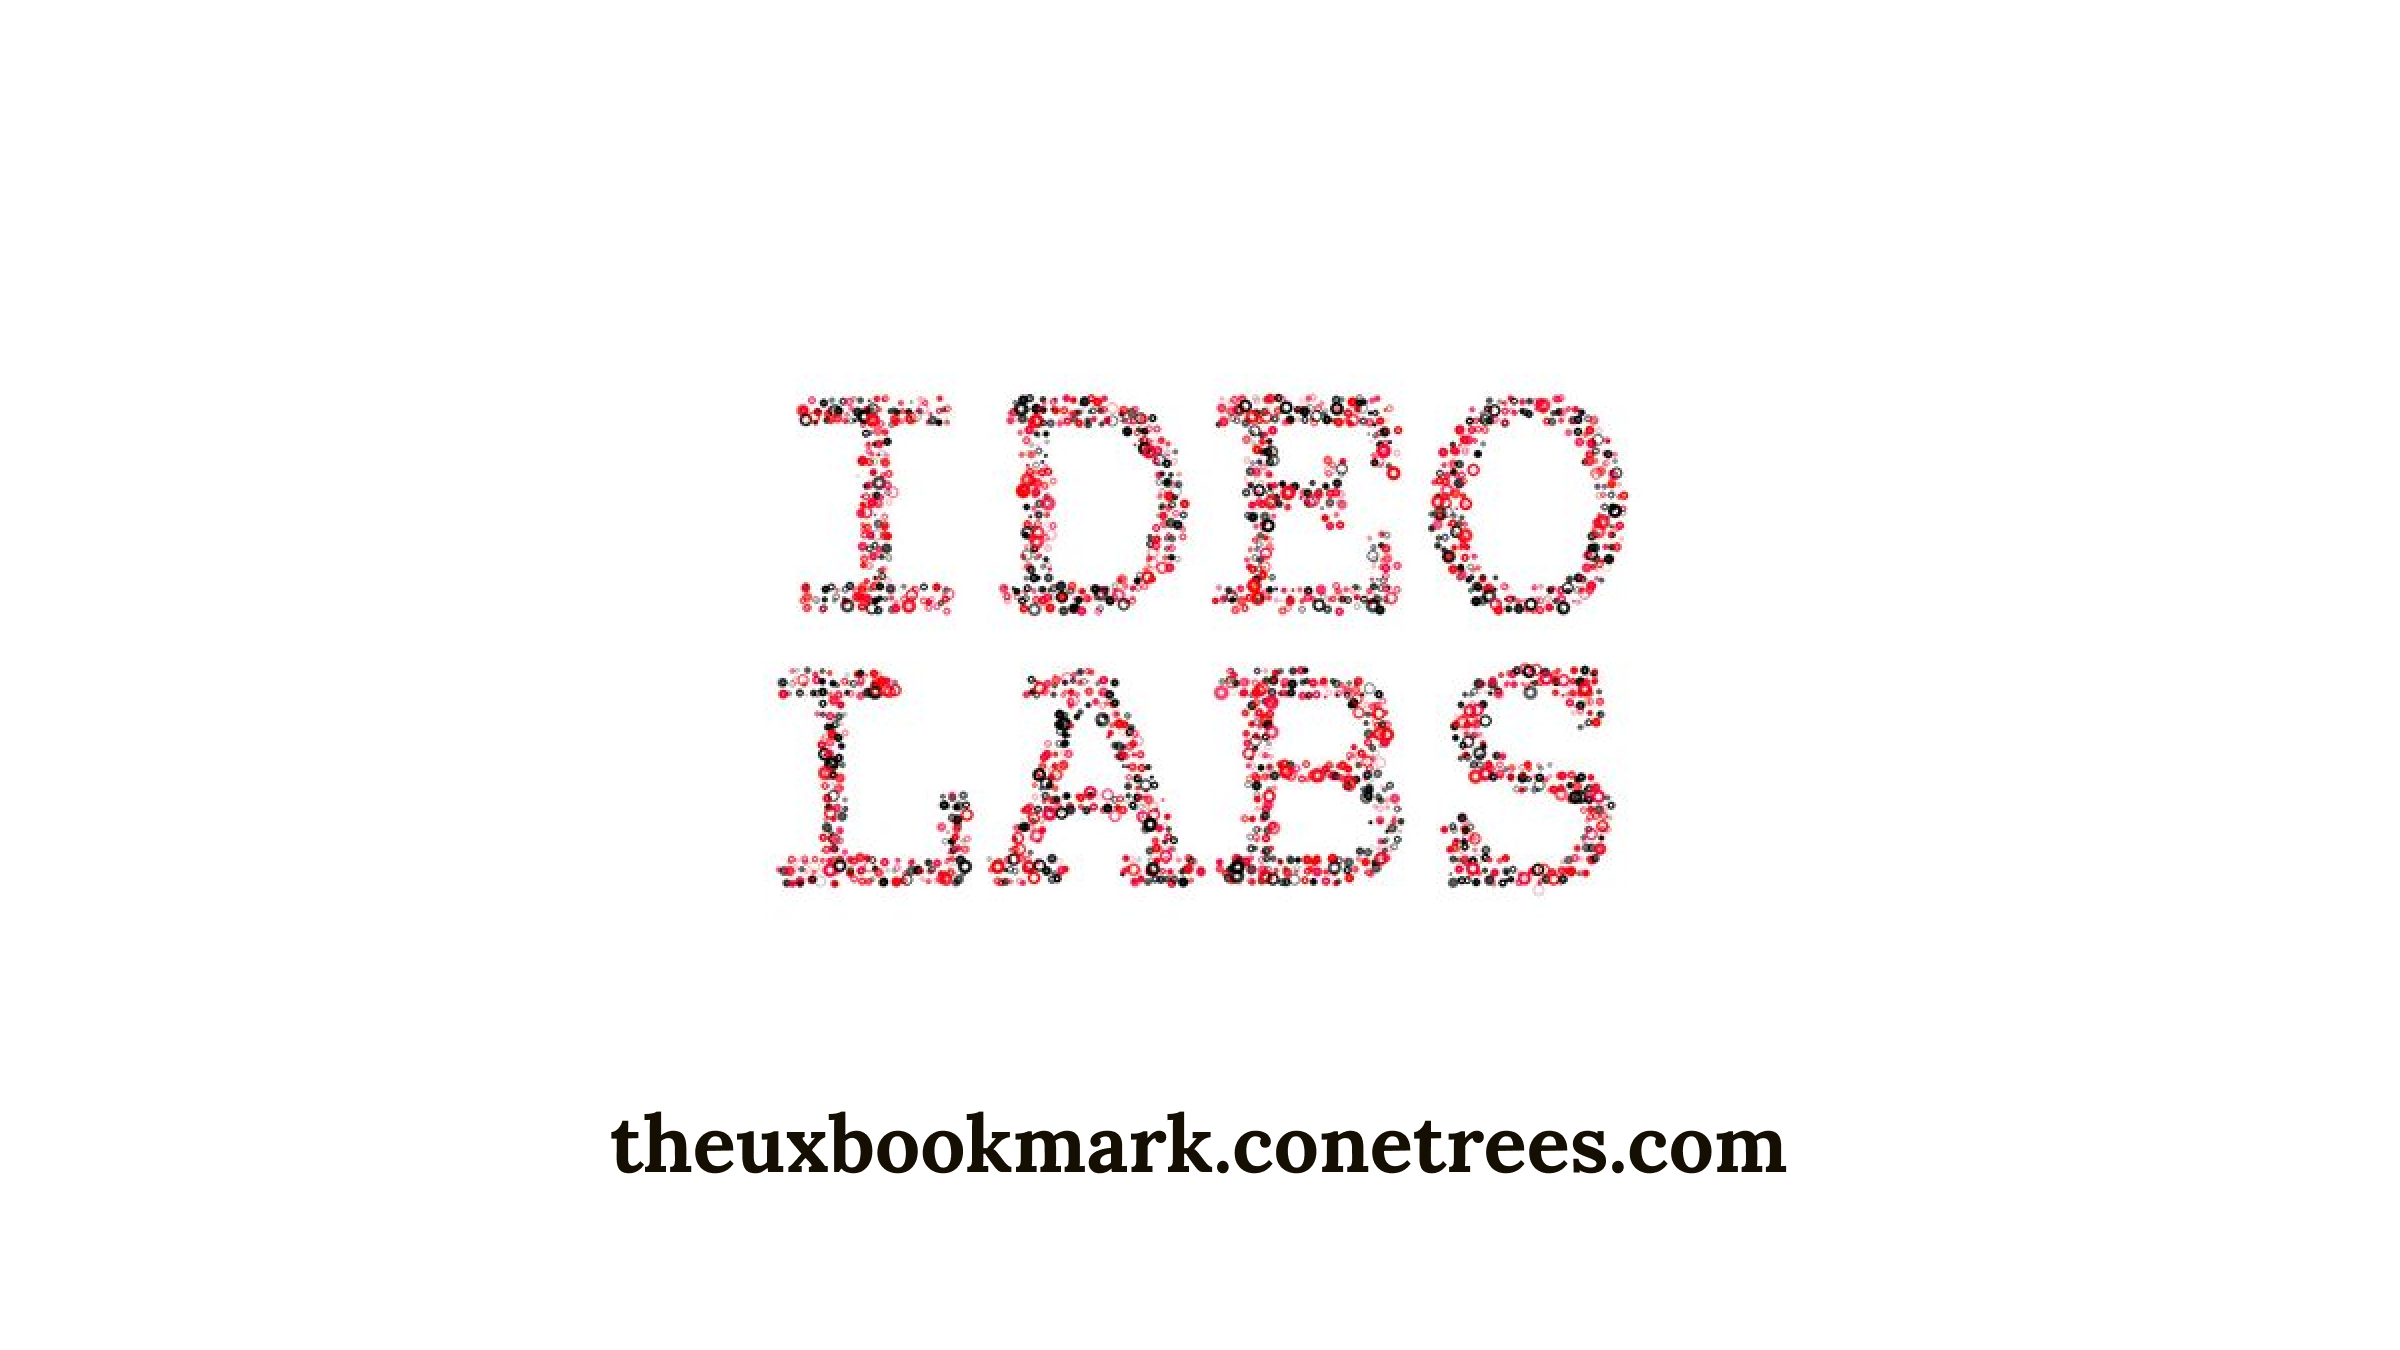 IDEO Labs